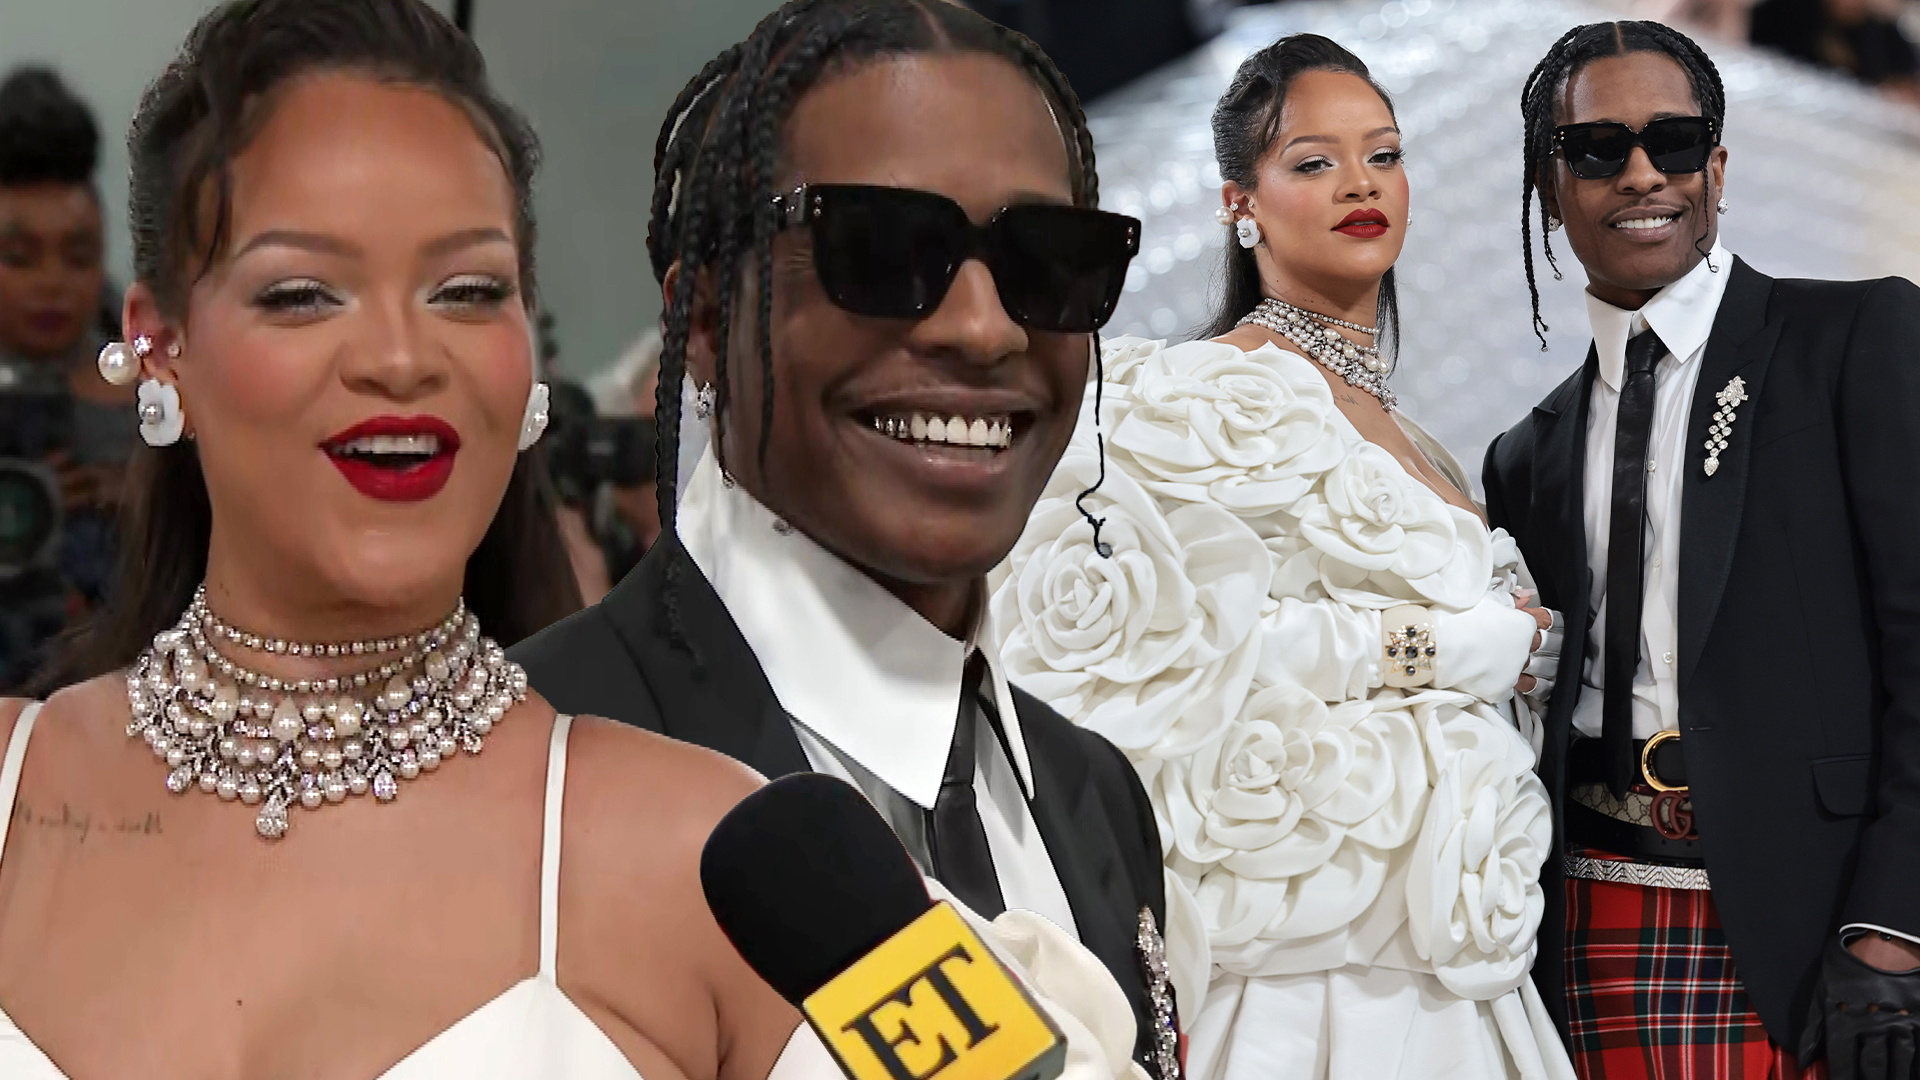 A$AP Rocky Apologizes to Woman He Shoved, Jumped Over Before Met Gala